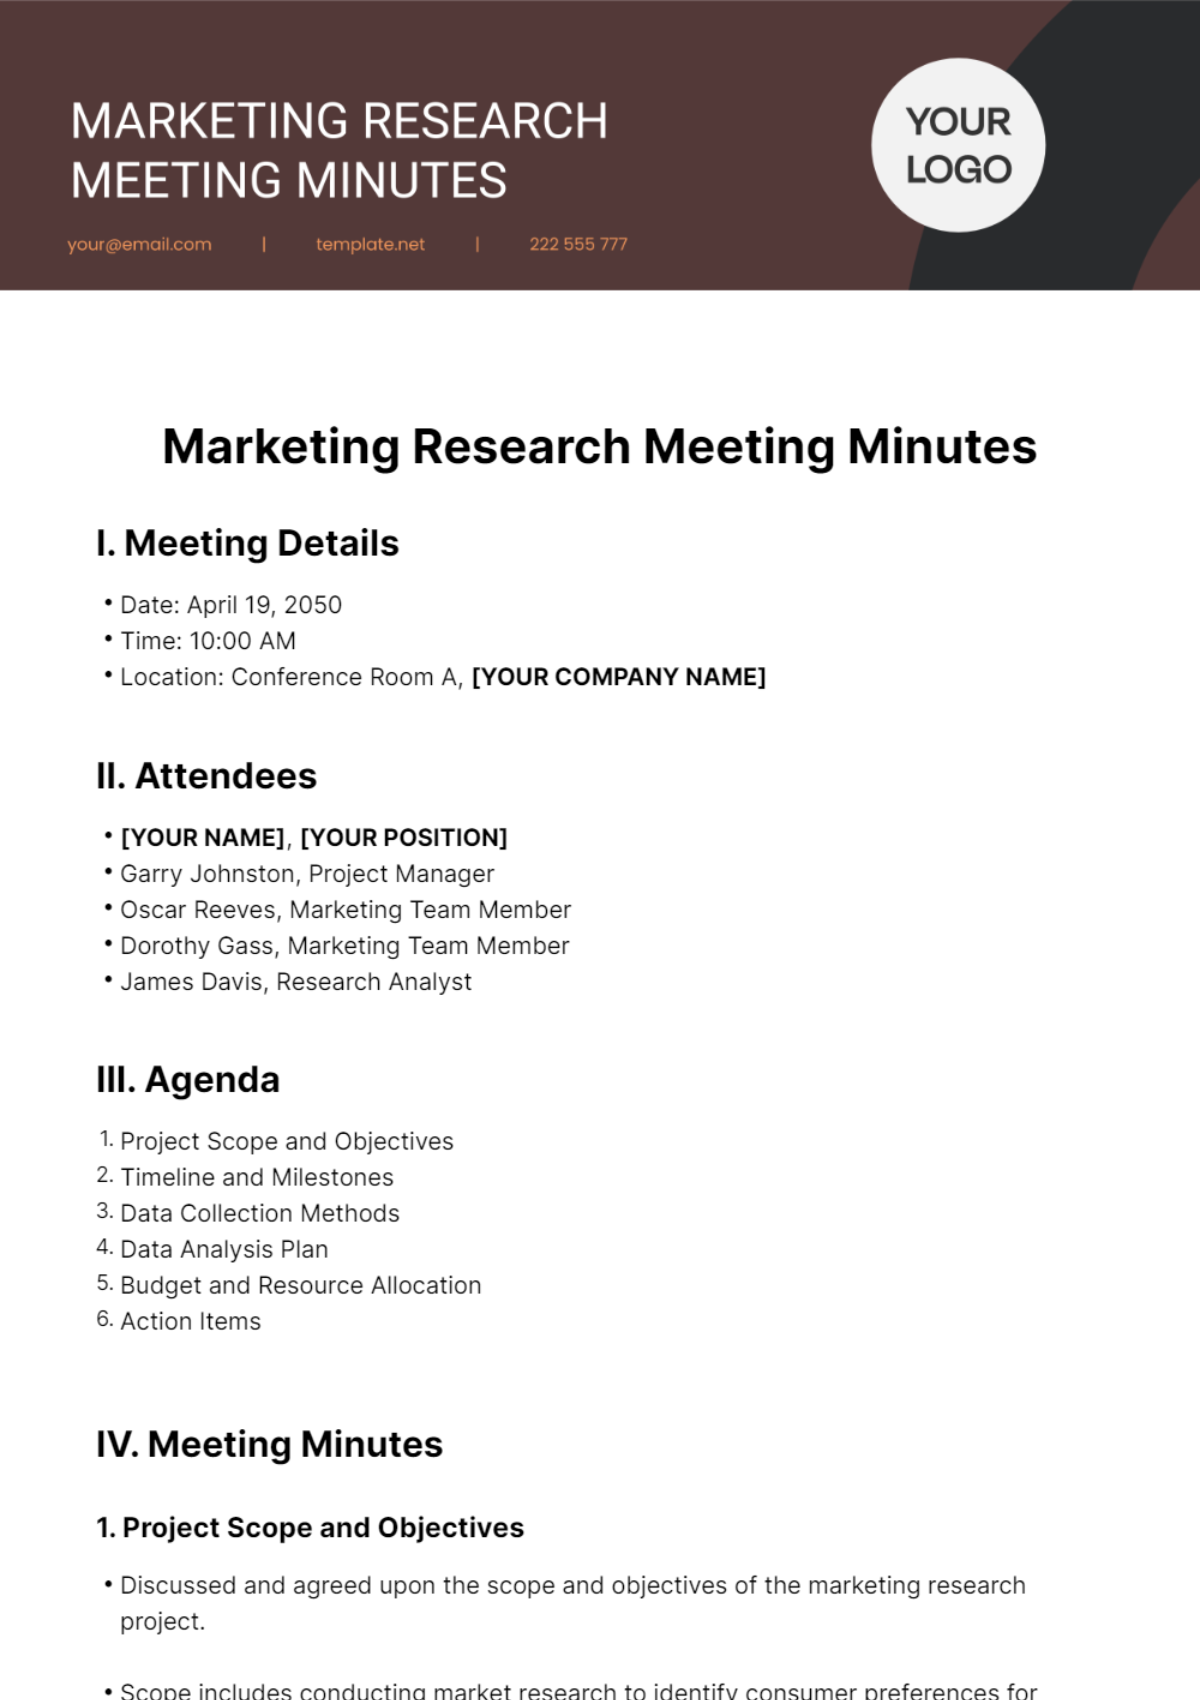 Marketing Research Meeting Minutes Template